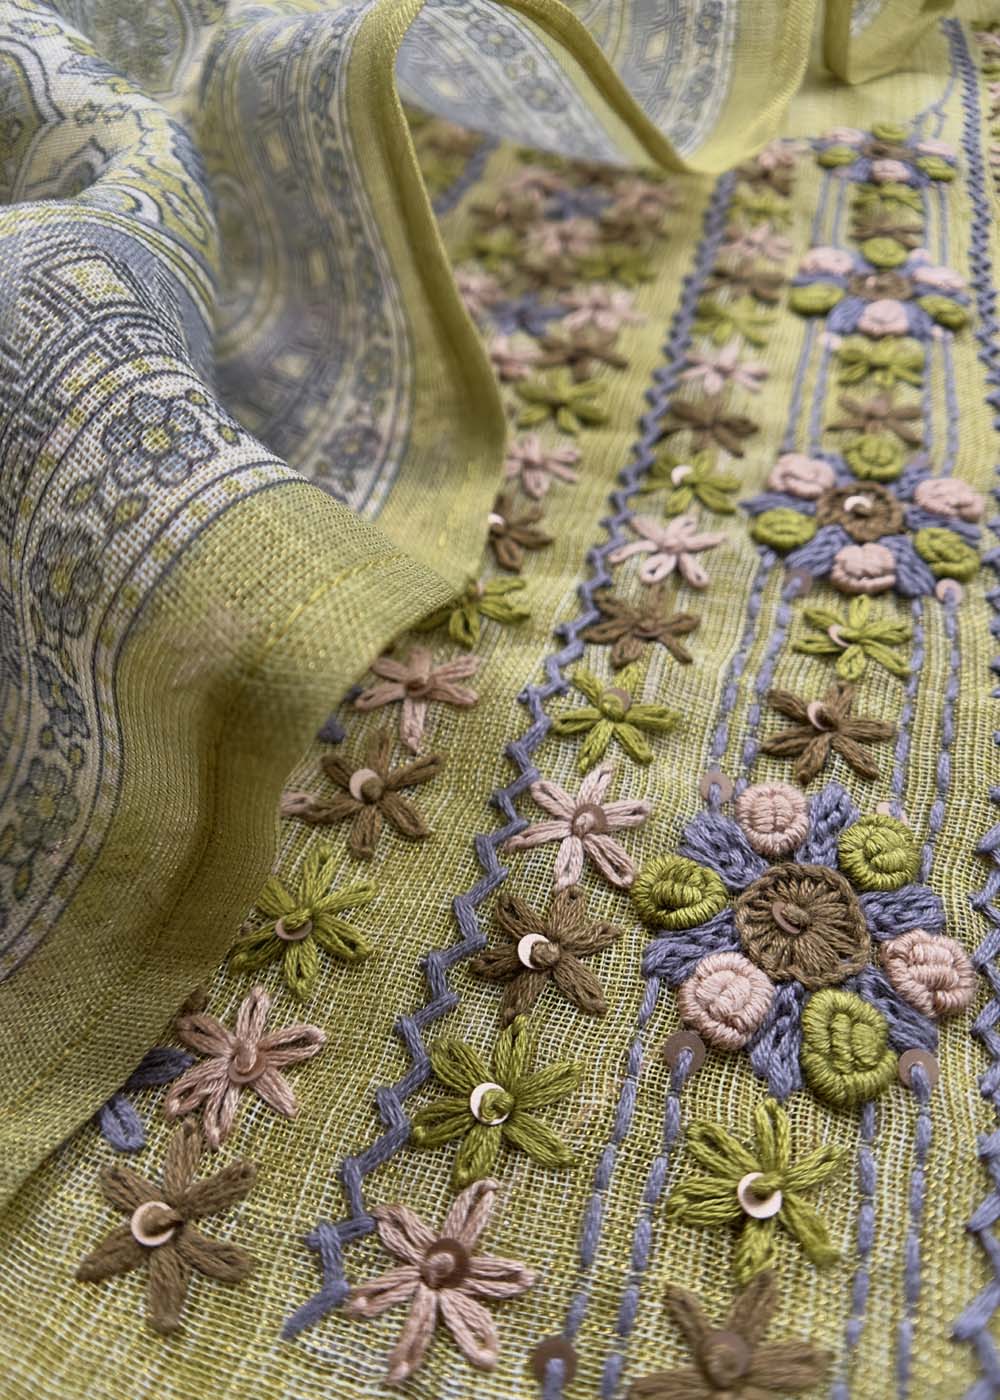 Green Linen Chanderi Suit with french knot embroidery